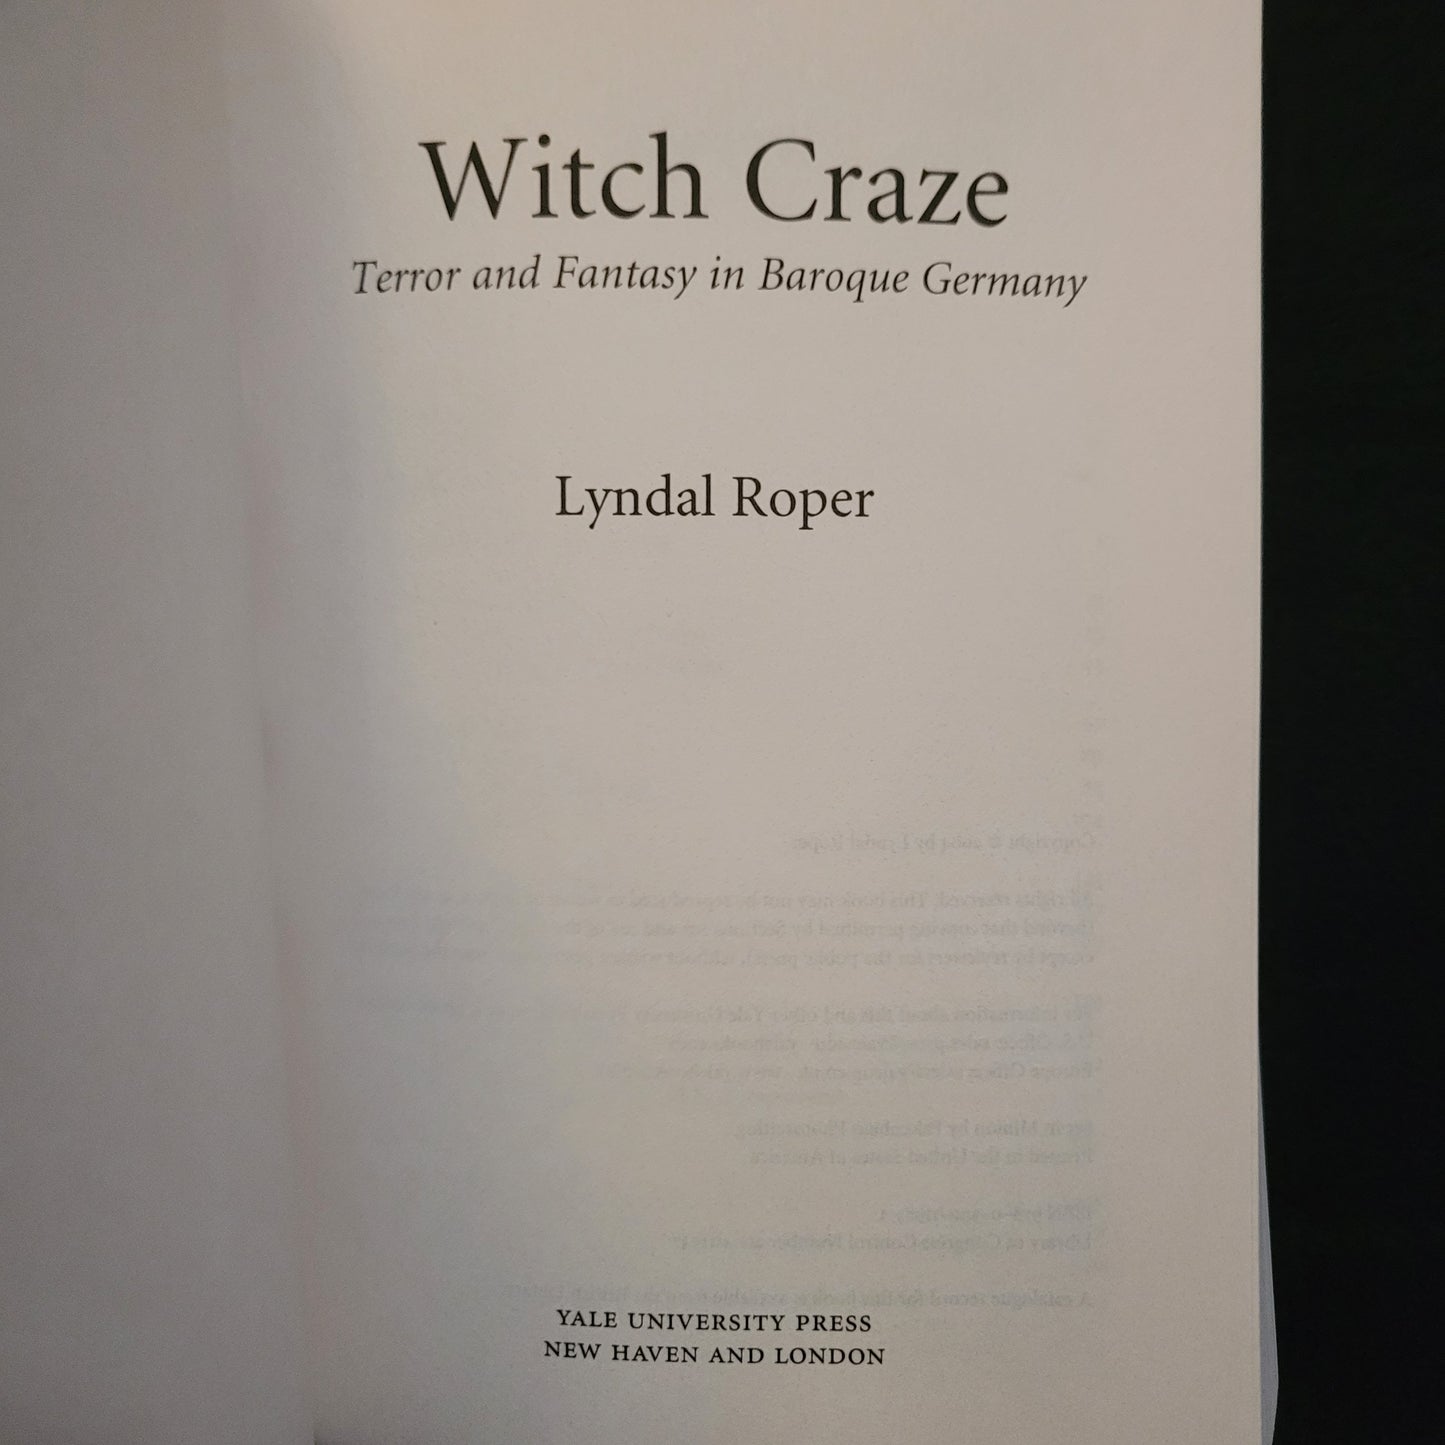 Witch Craze: Terror and Fantasy in Baroque Germany by Lyndal Roper (Yale University Press, 2004) Paperback